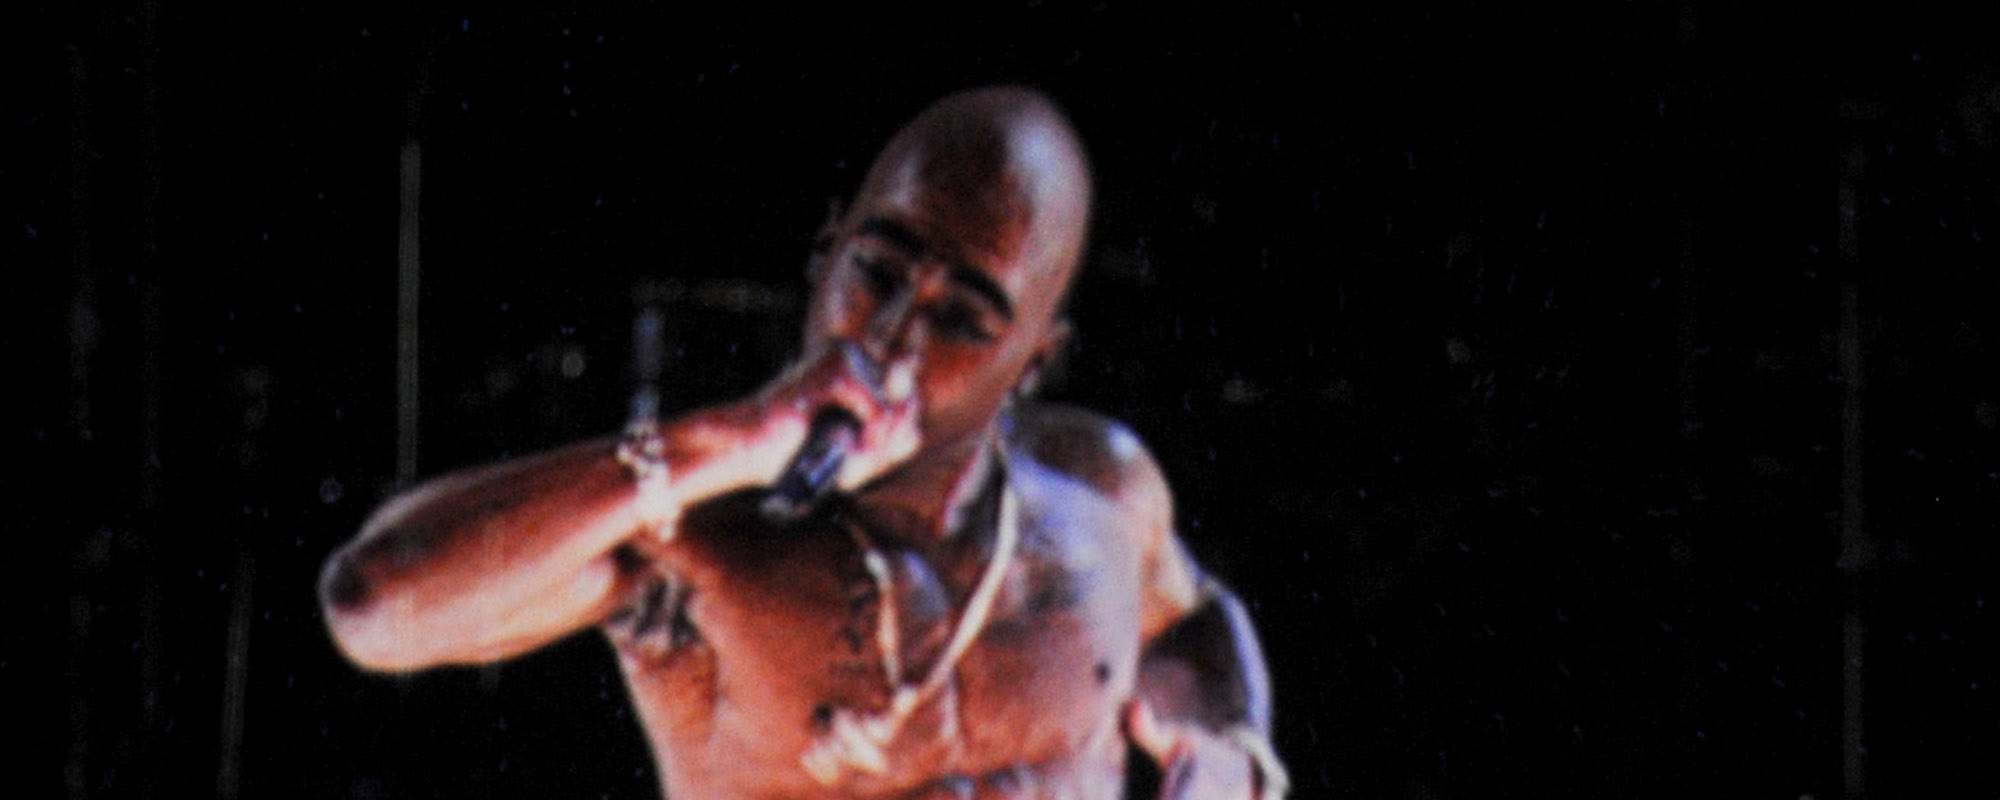 Tupac’s Hit “Dear Mama” Involved in New Lawsuit